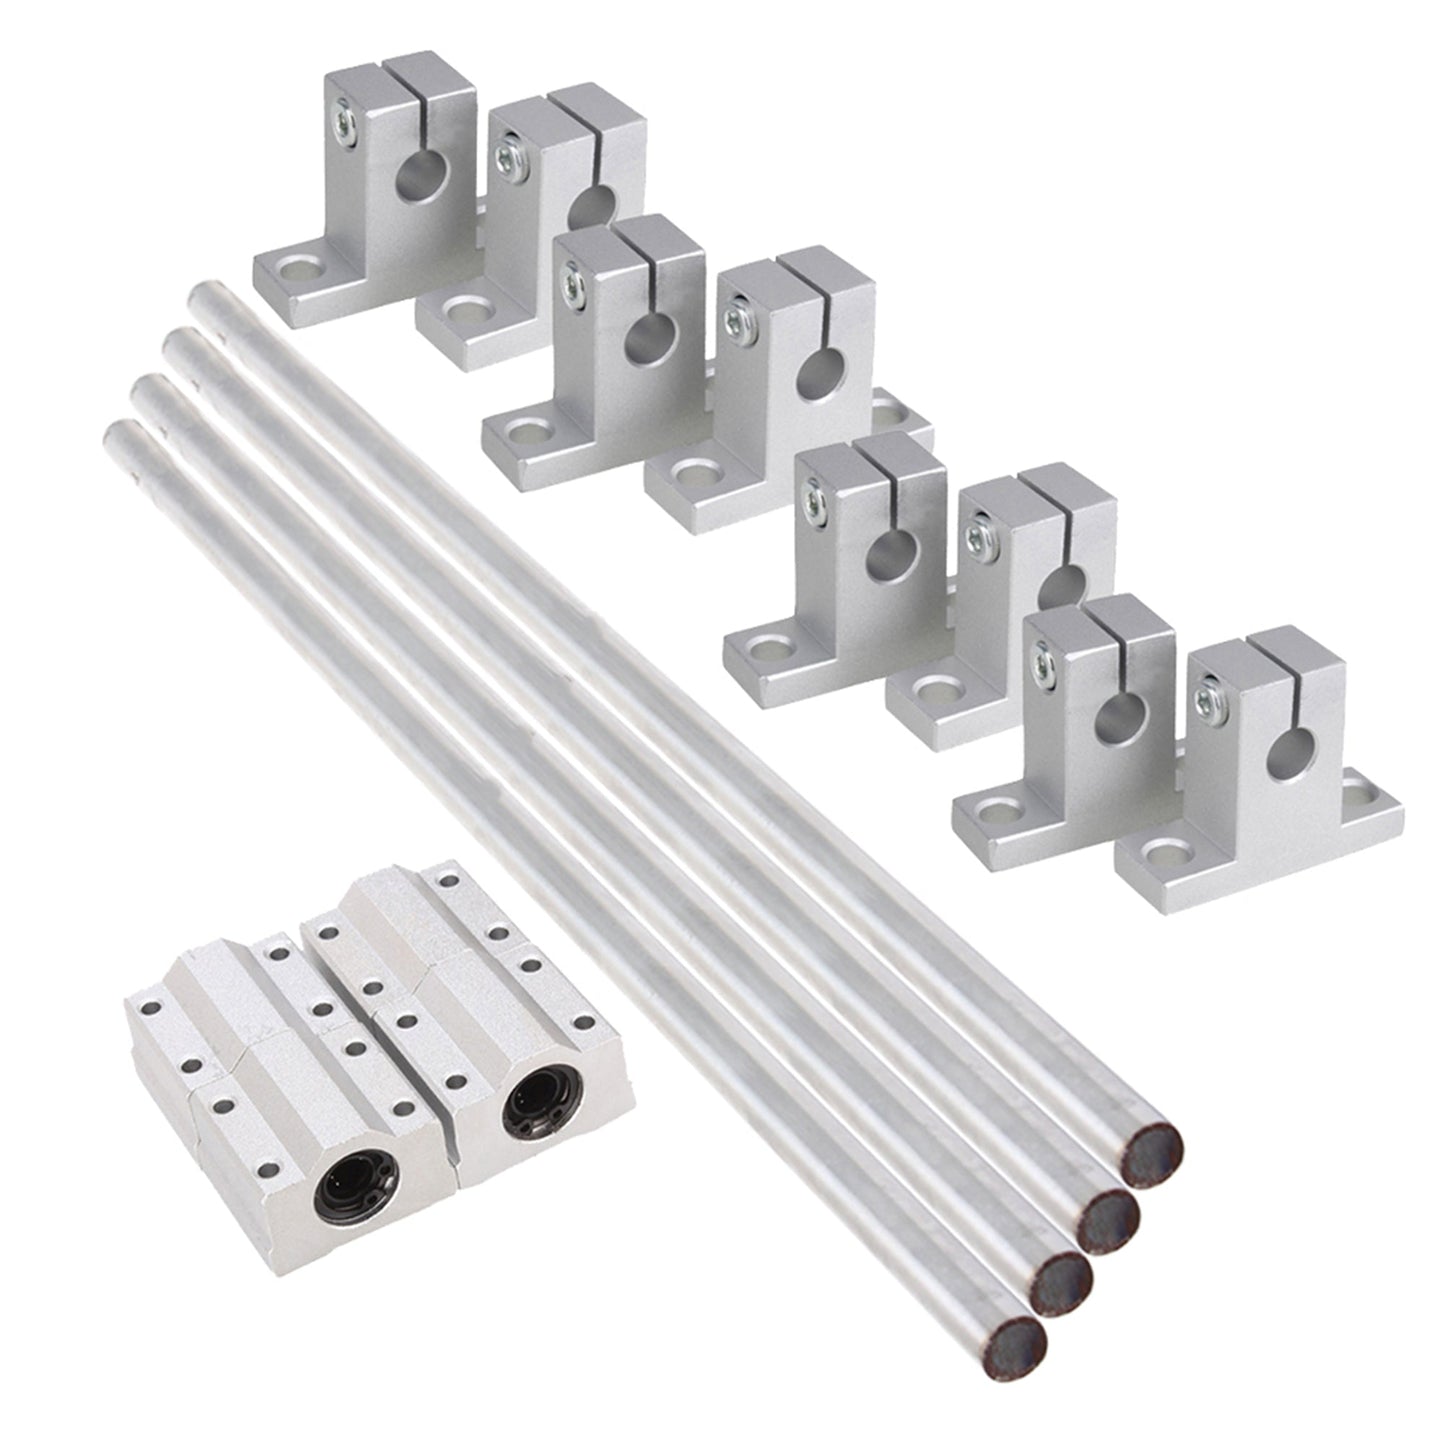 BQLZR Metal Linear Ball Bearing Slide Set with Optical Axis Rail Support Pack of 4